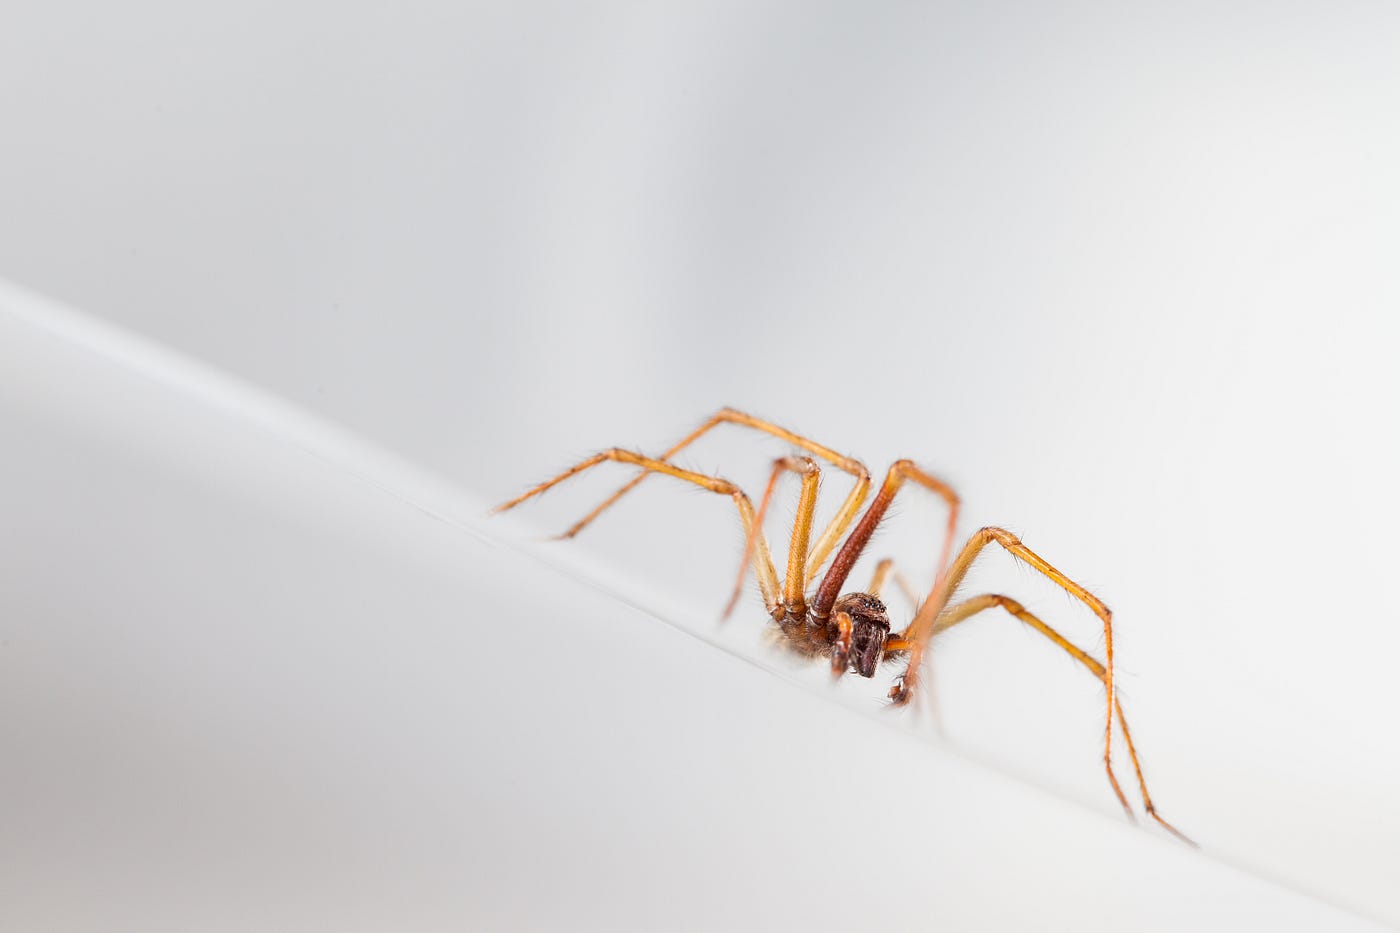 Is there a mommy long-legged spider? - Quora